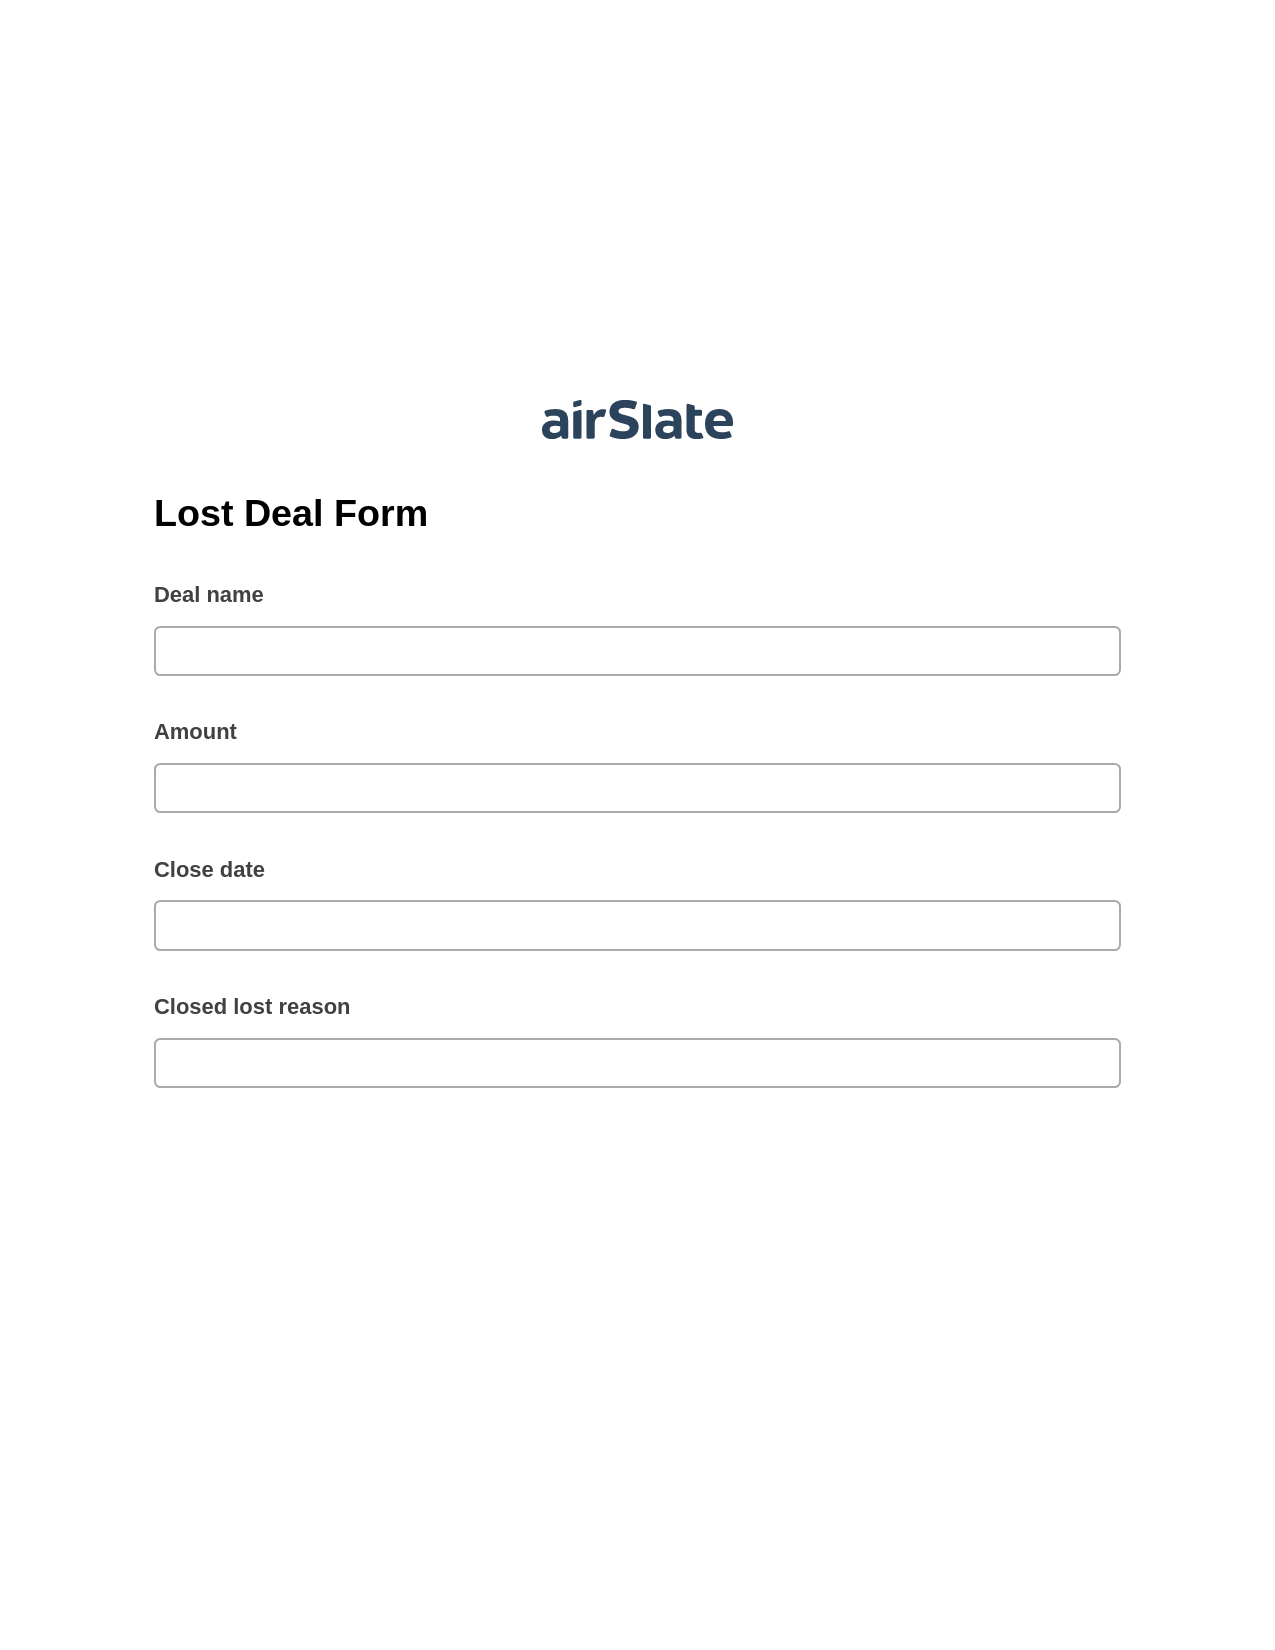 Lost Deal Form Pre-fill from CSV File Bot, SendGrid send Campaign bot, Export to Excel 365 Bot